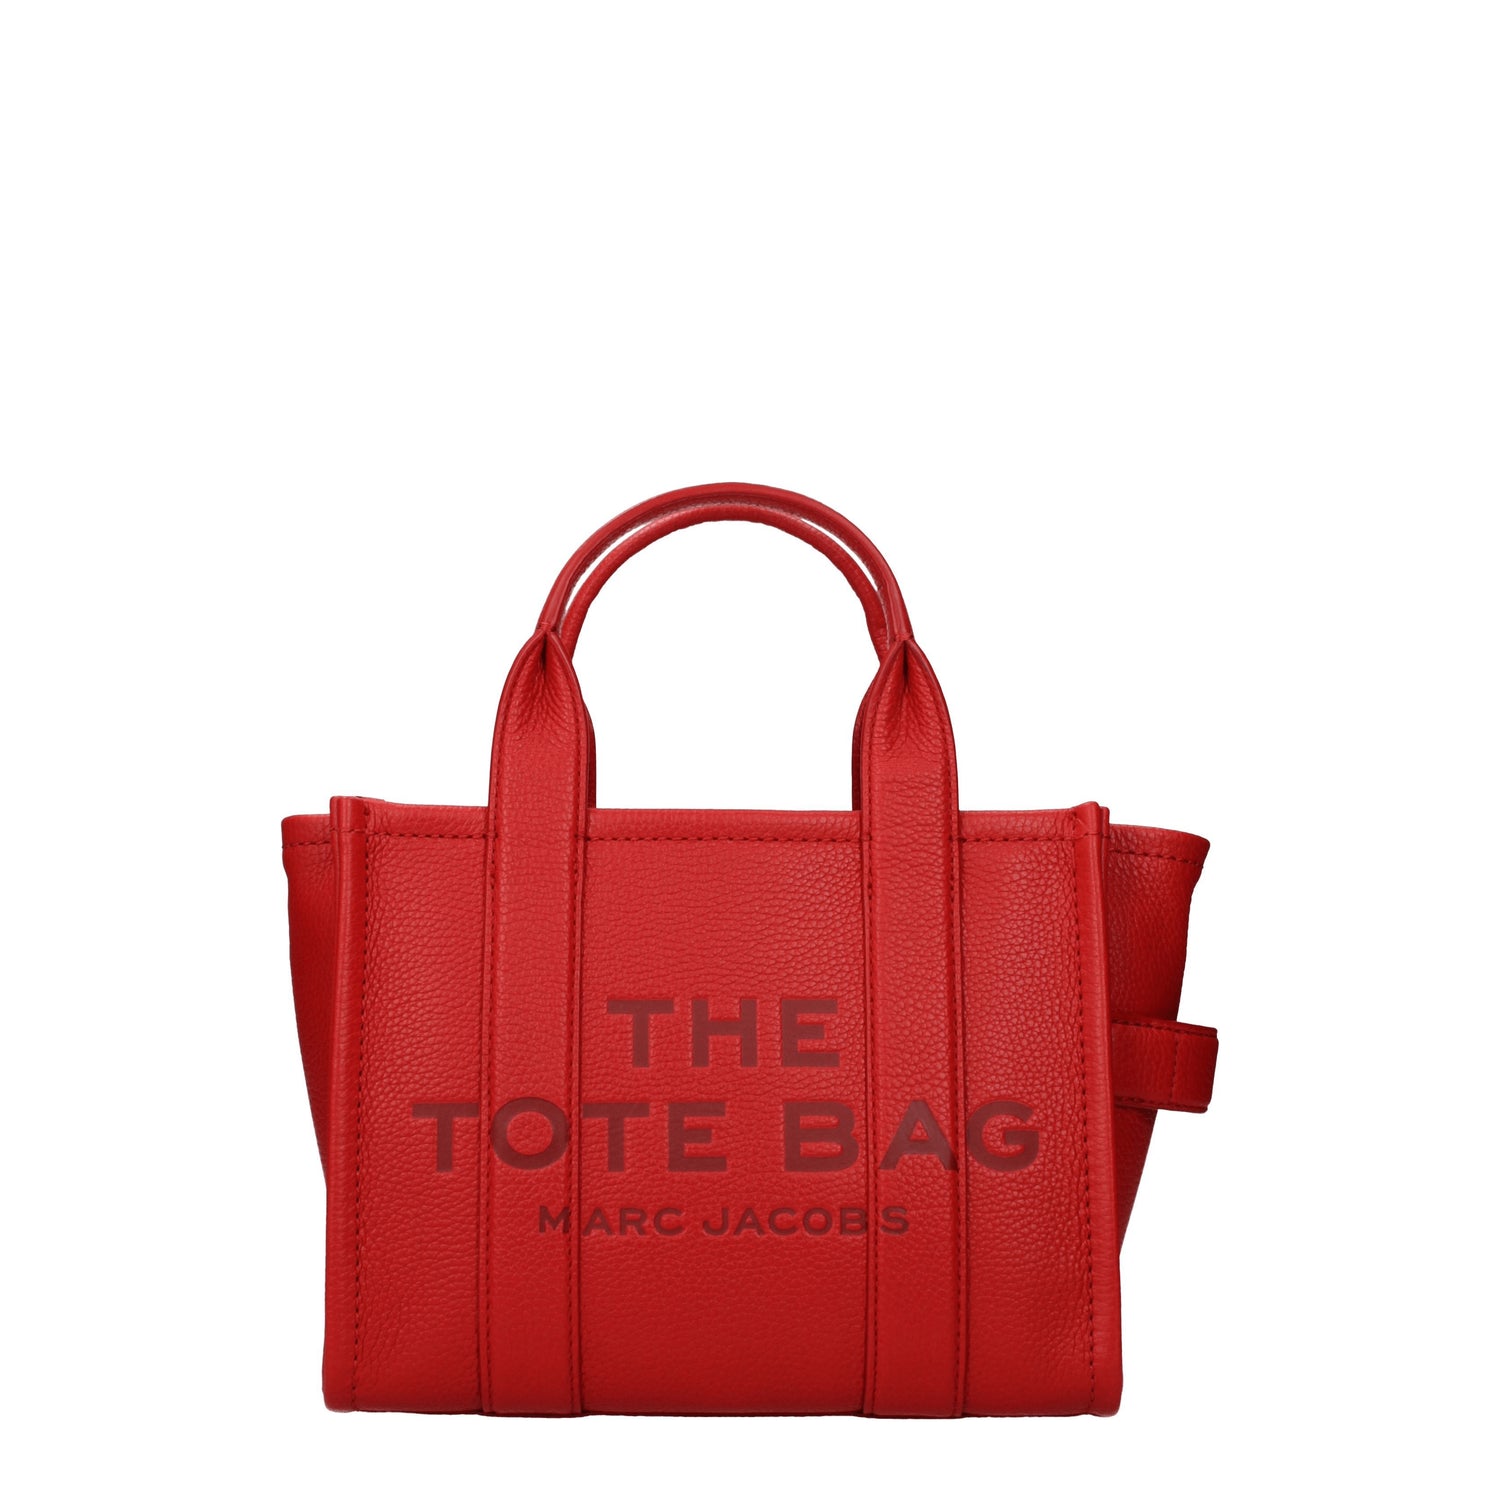 Marc Jacobs Borse a Mano Donna Pelle Rosso True Red